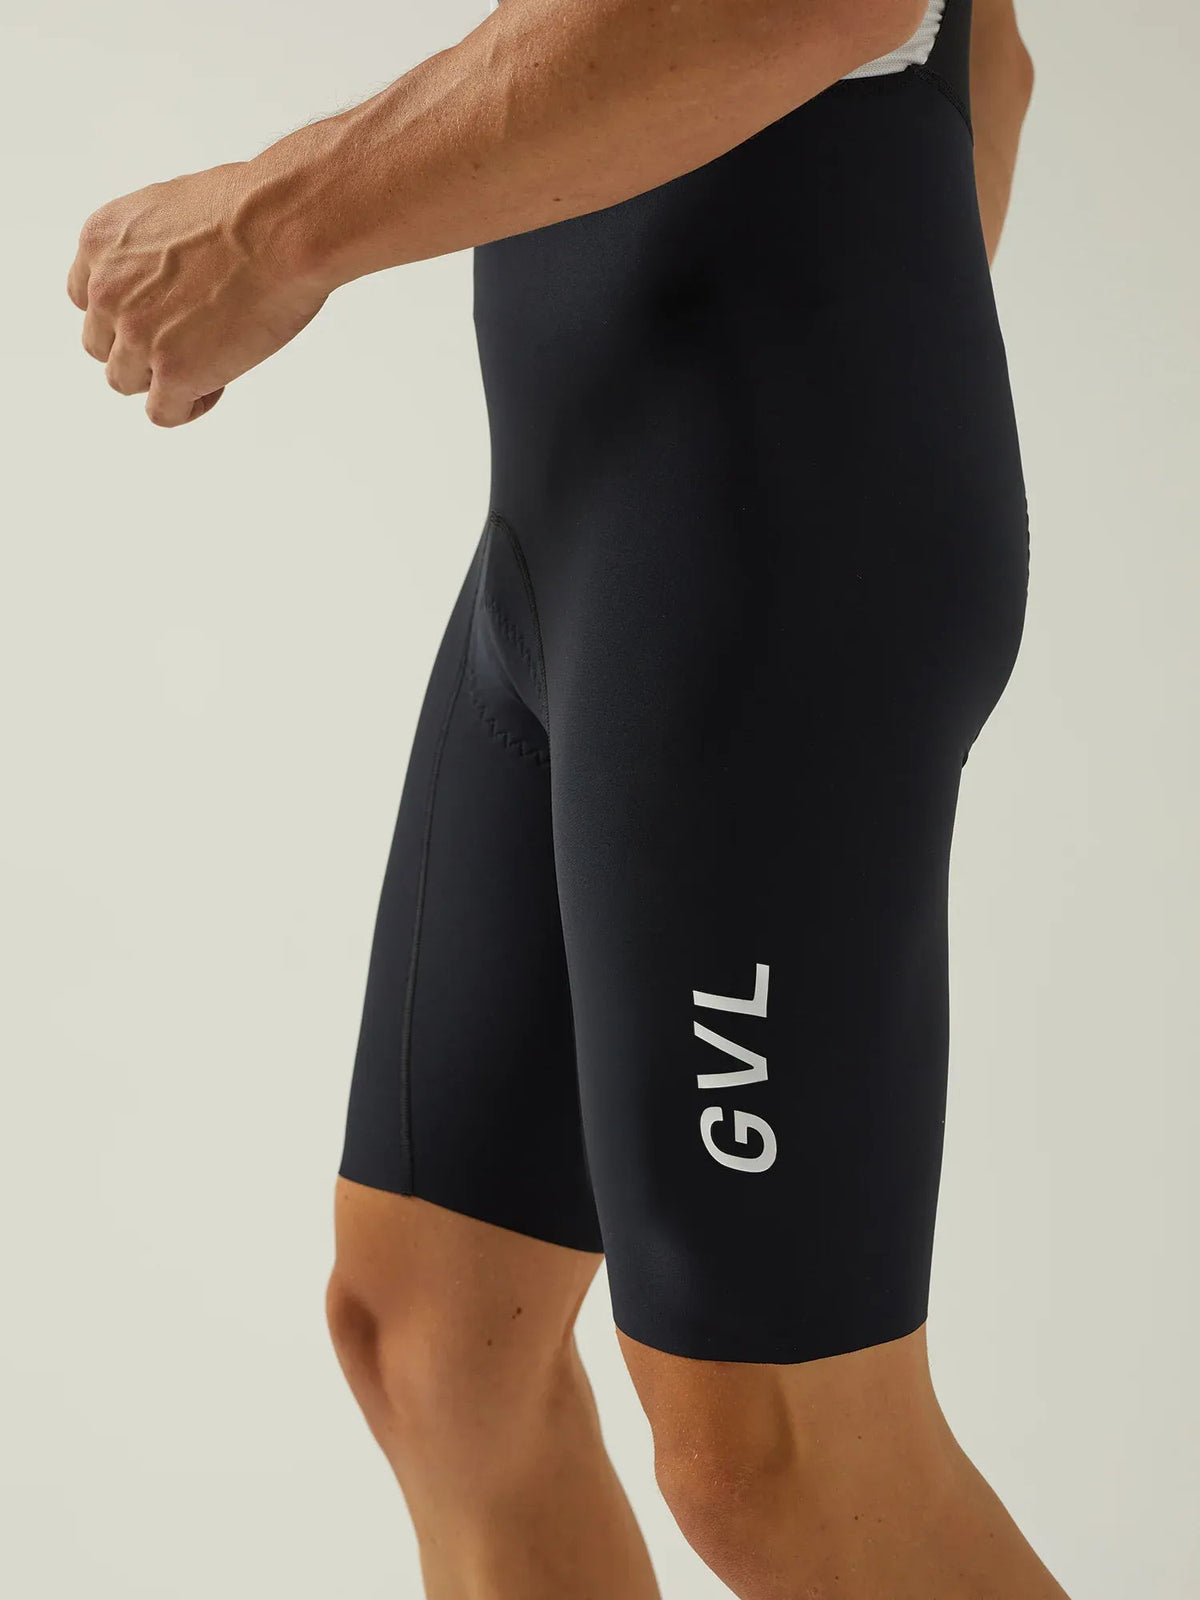 Givelo Lacefly Black メンズ ビブショーツ | GEARED